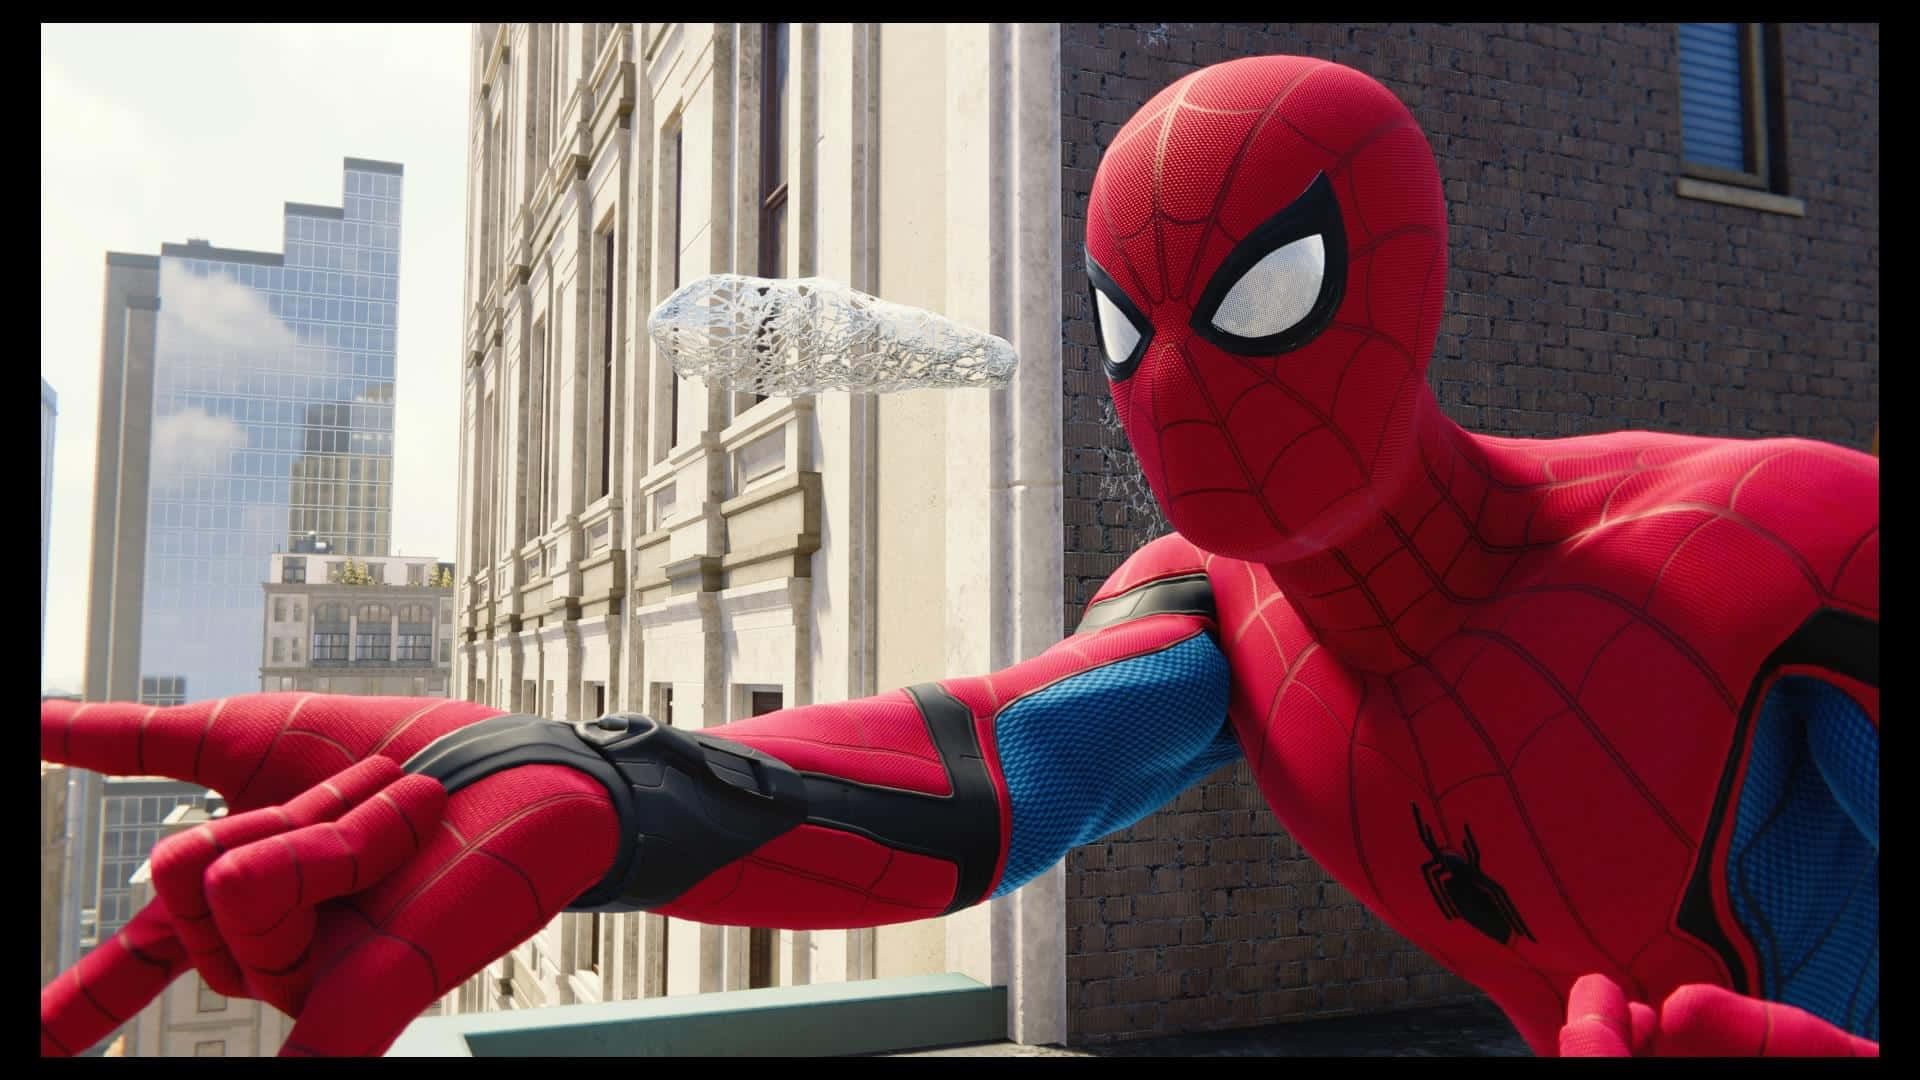 Spider-Man showcasing his web shooter in action Wallpaper